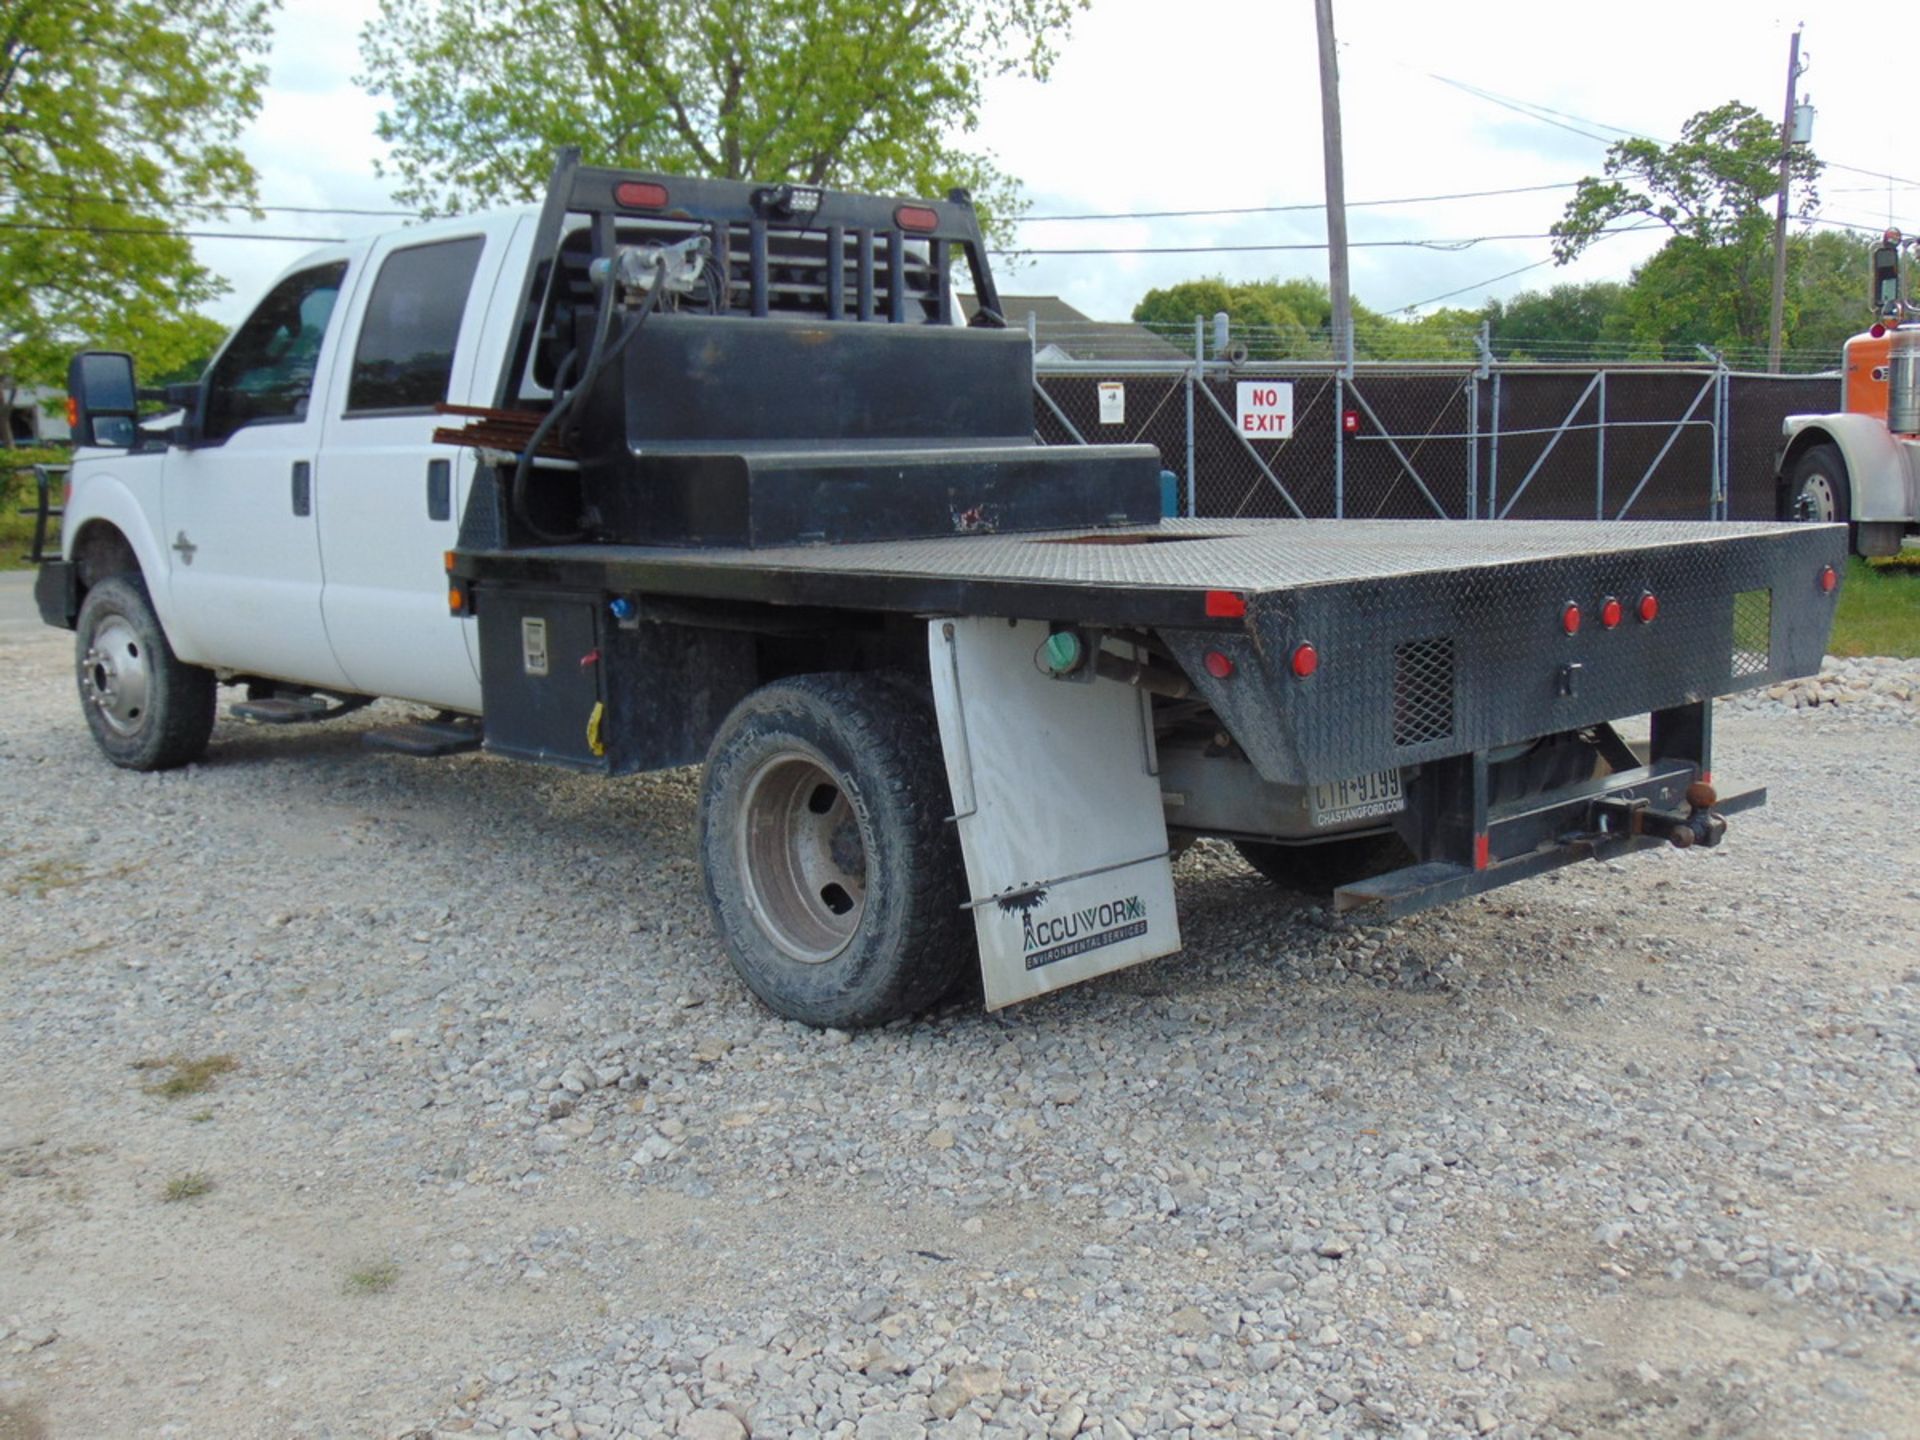 2014 Ford F-350 Super Duty Super Crew Flat Bed Pickup Truck, w/ Aux. Oil Tank and Pump, In-Bed - Image 4 of 14